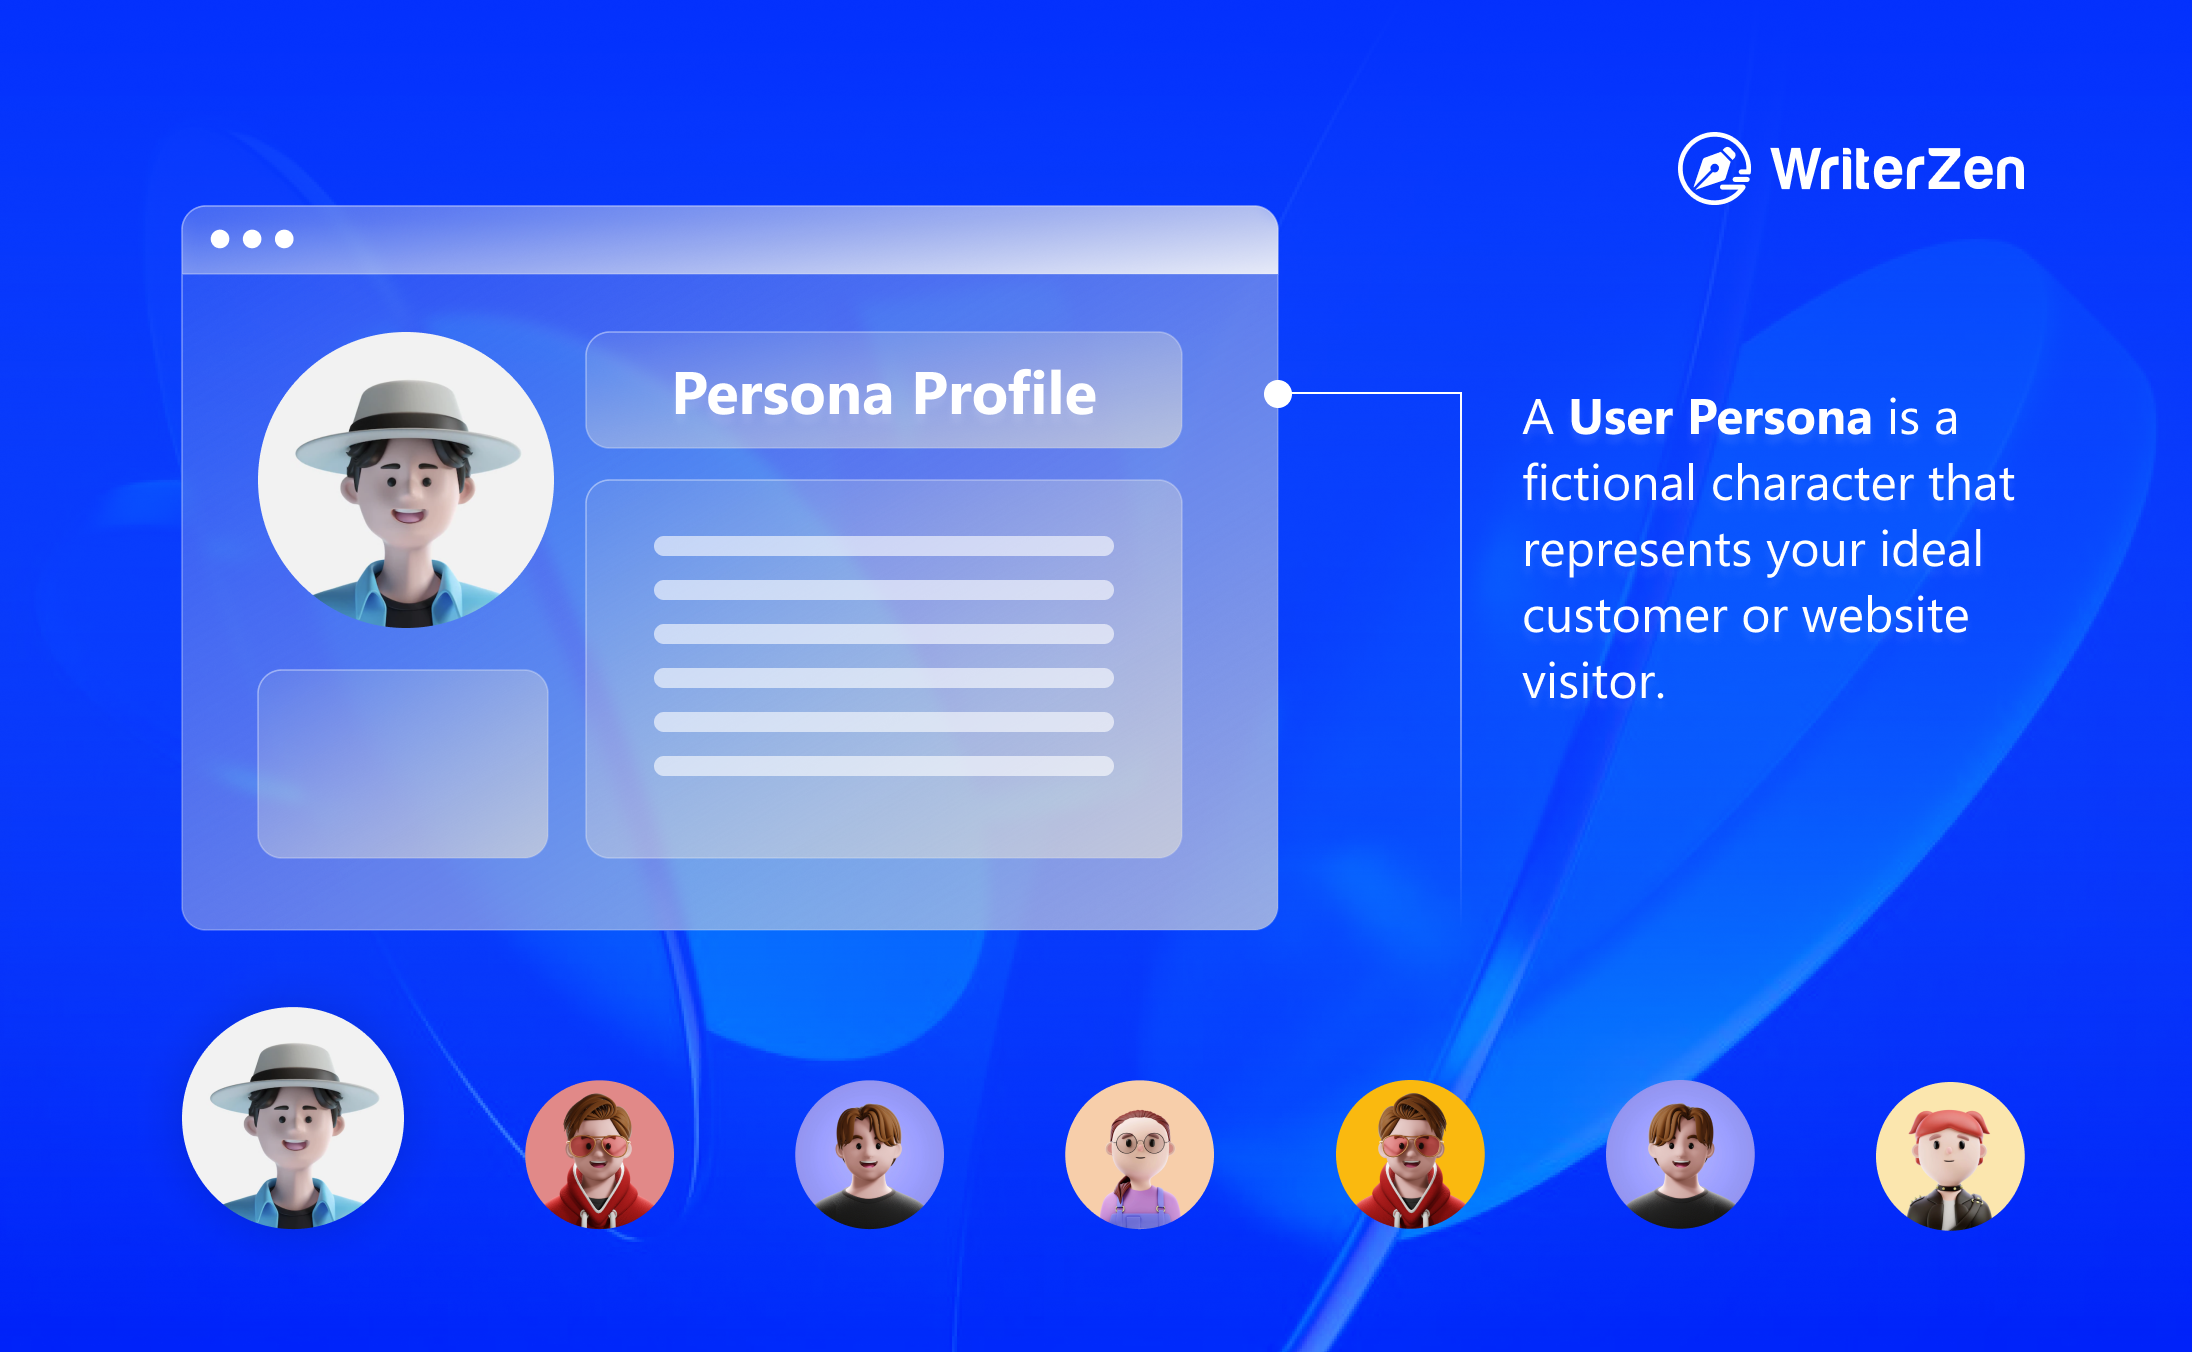 What is User Persona